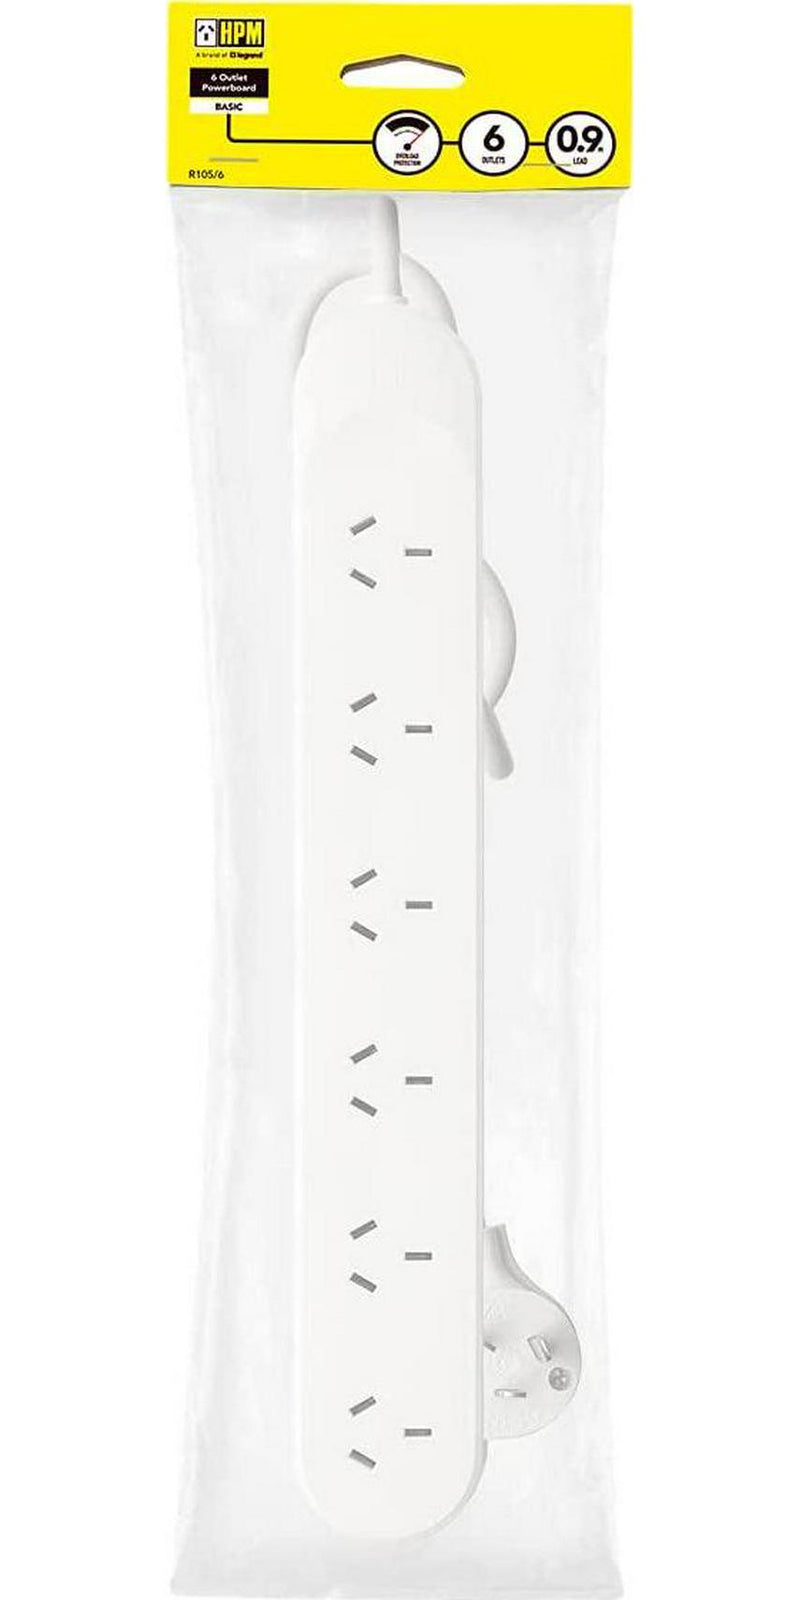 HPM R105/6 Standard 6 Outlet Powerboard White